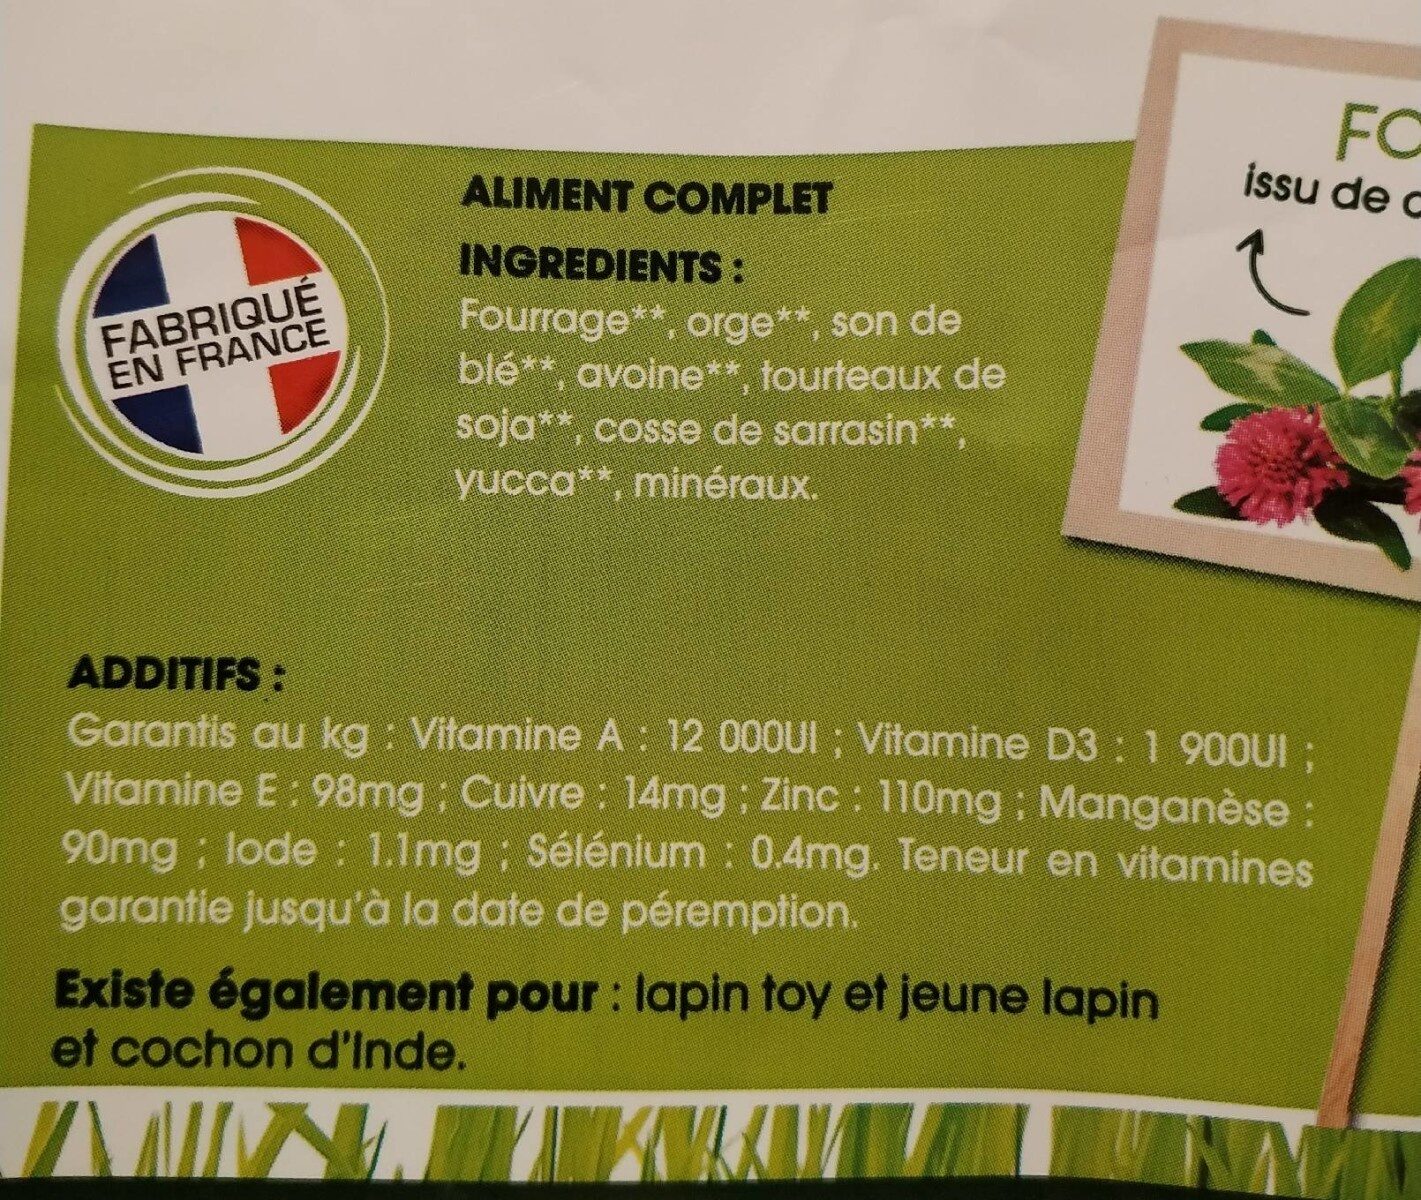 Repas complet pour lapin nain - Nutrition facts - fr